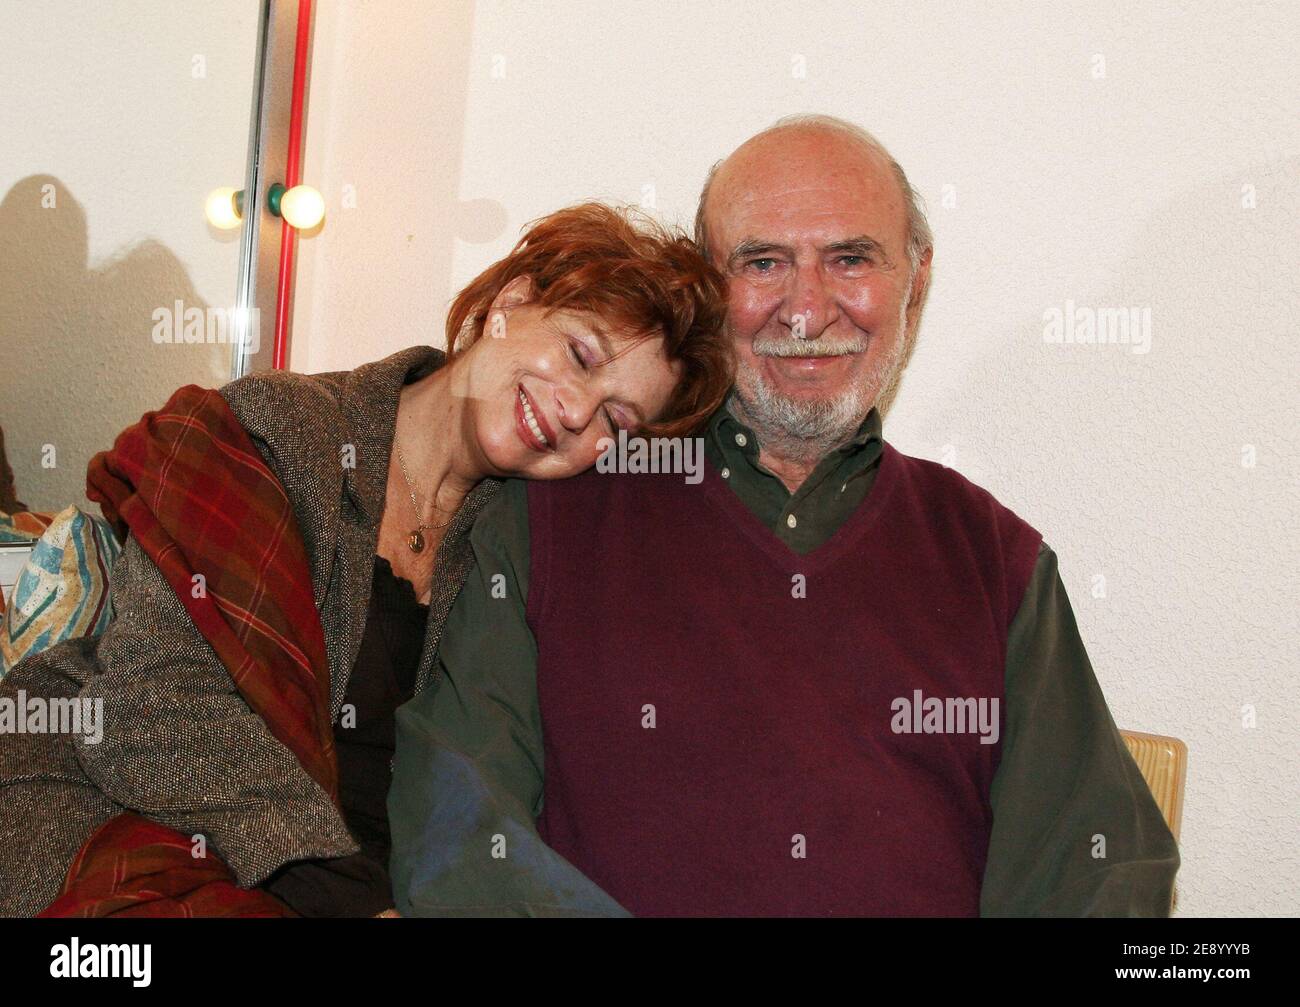 EXCLUSIVE - Actor Jean-Pierre Marielle and his wife actress Agathe Natanson  pose backstage after performing their play 'Les Mots et la Chose' at the  Theatre de l'Oeuvre in Paris, France, on October